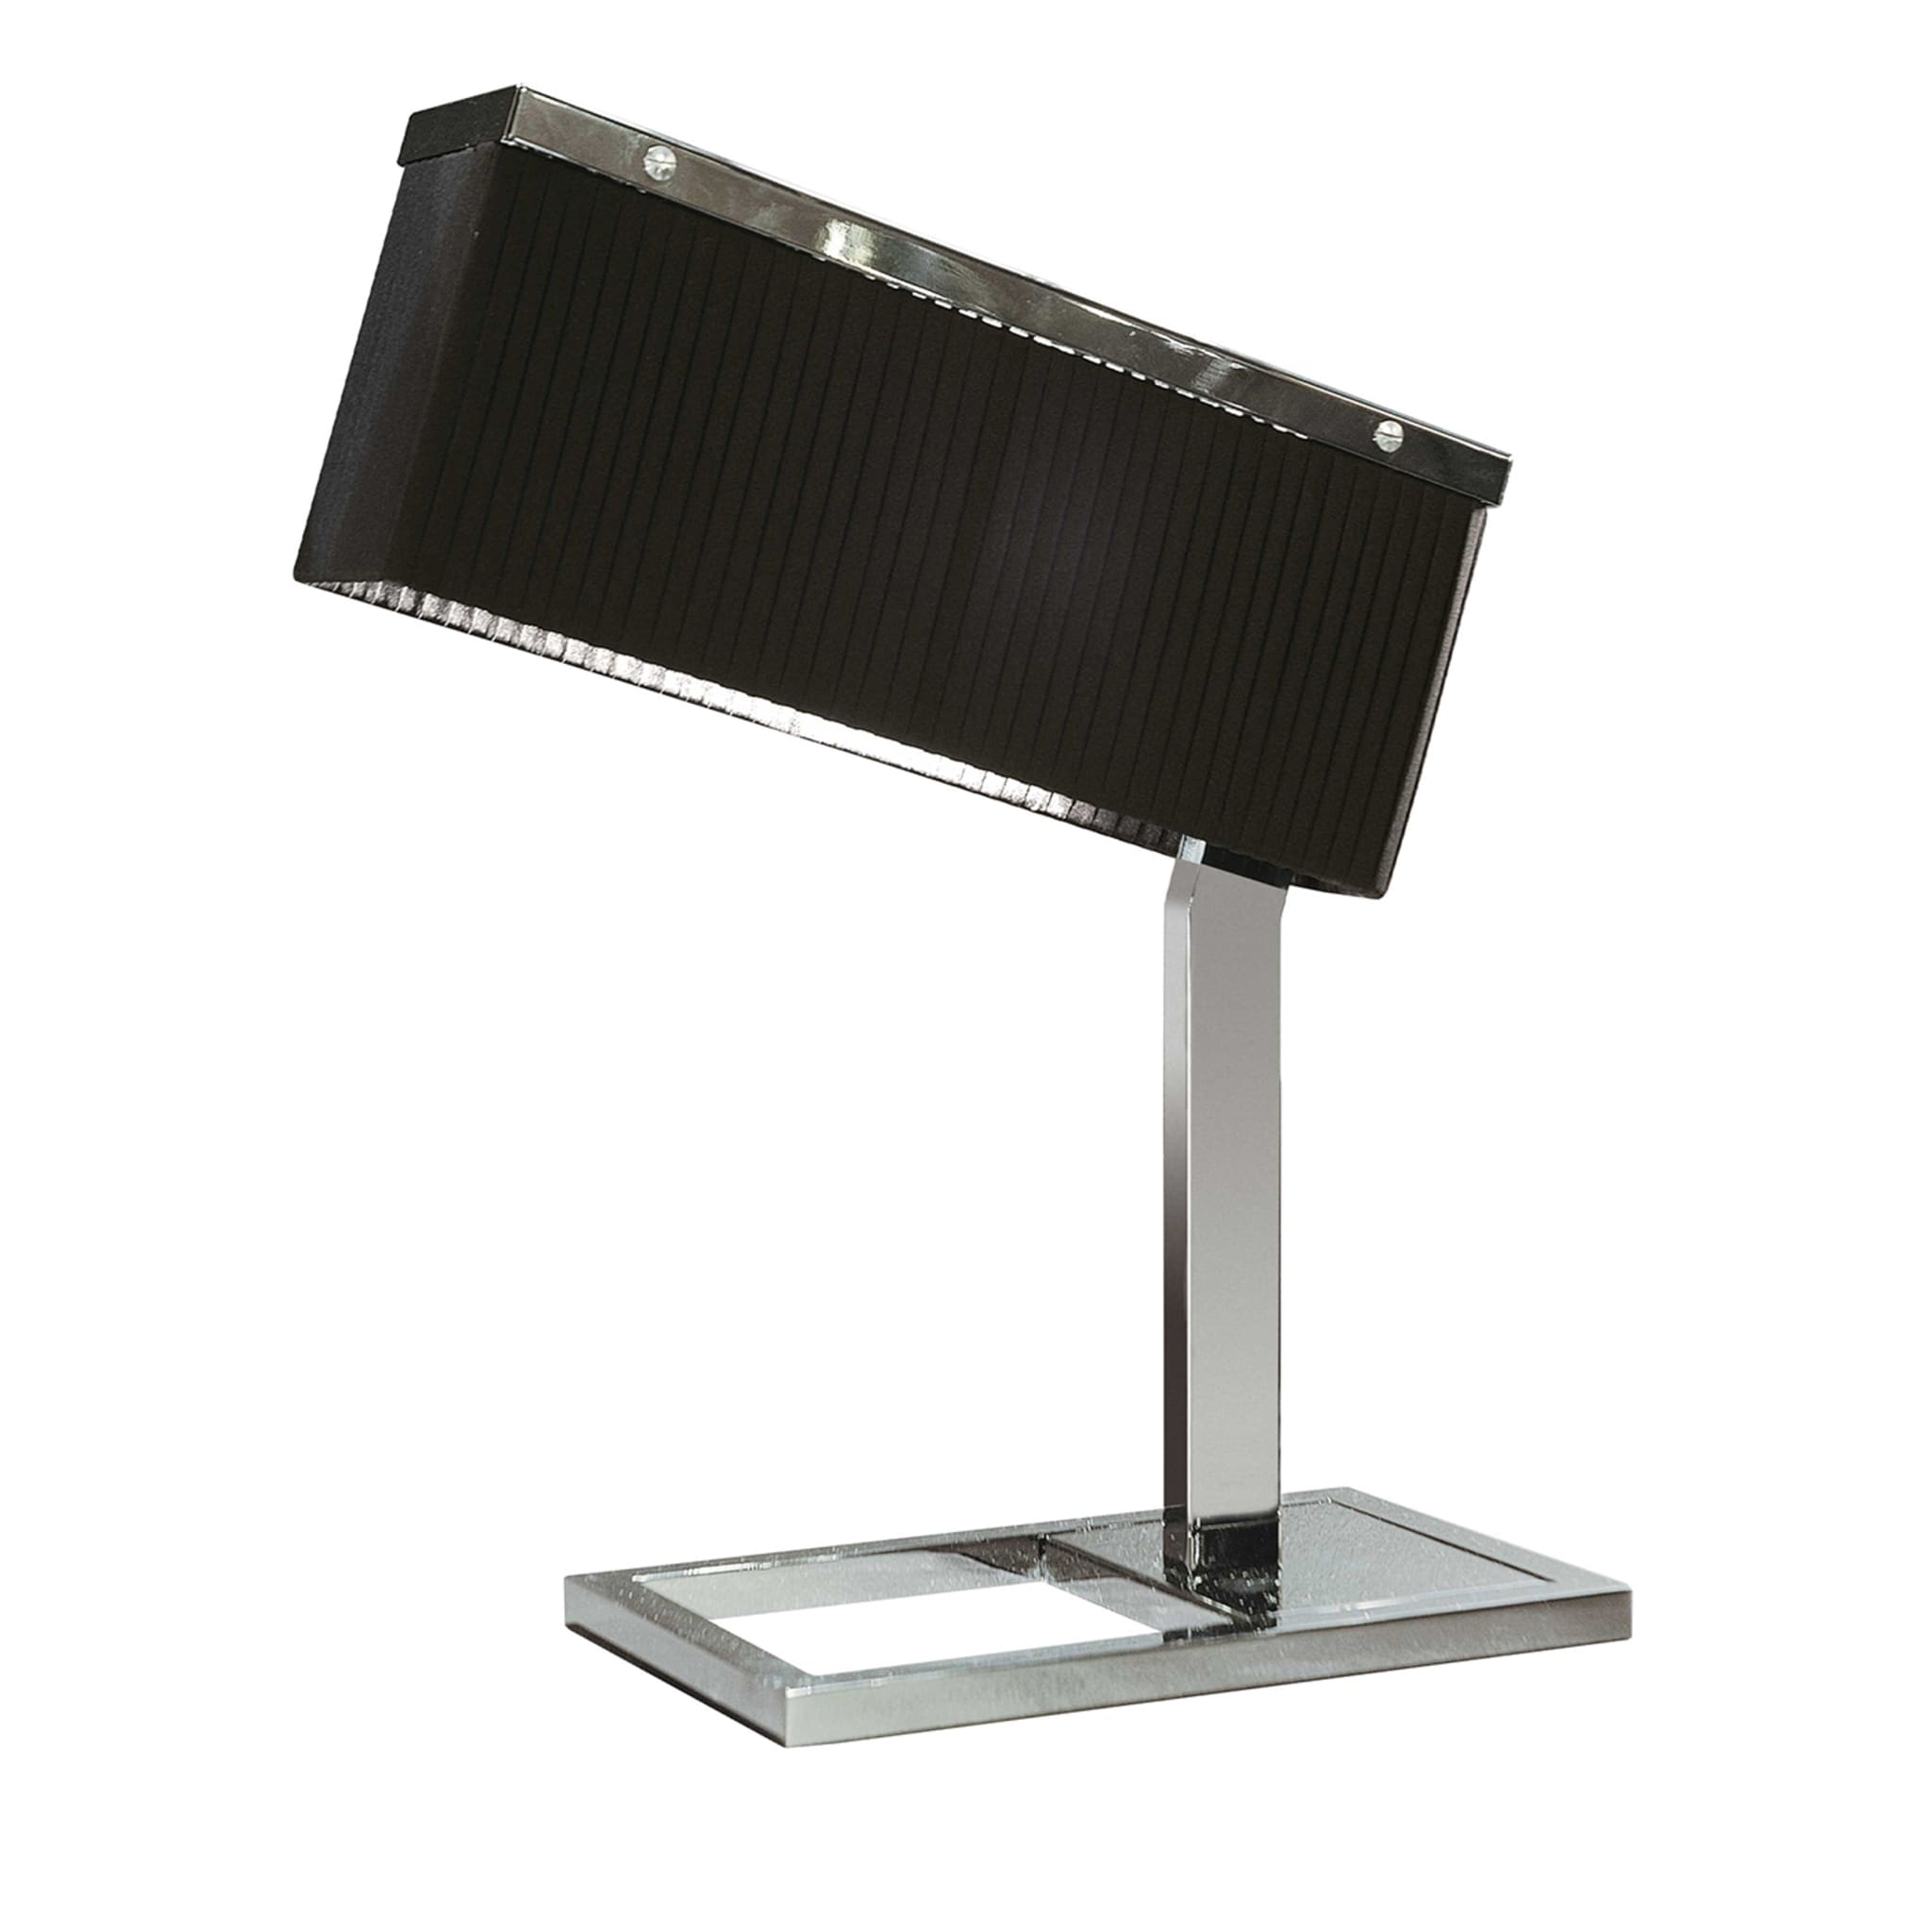 Gimko S Black Table Lamp by Arch. Luca Sgroi - Main view